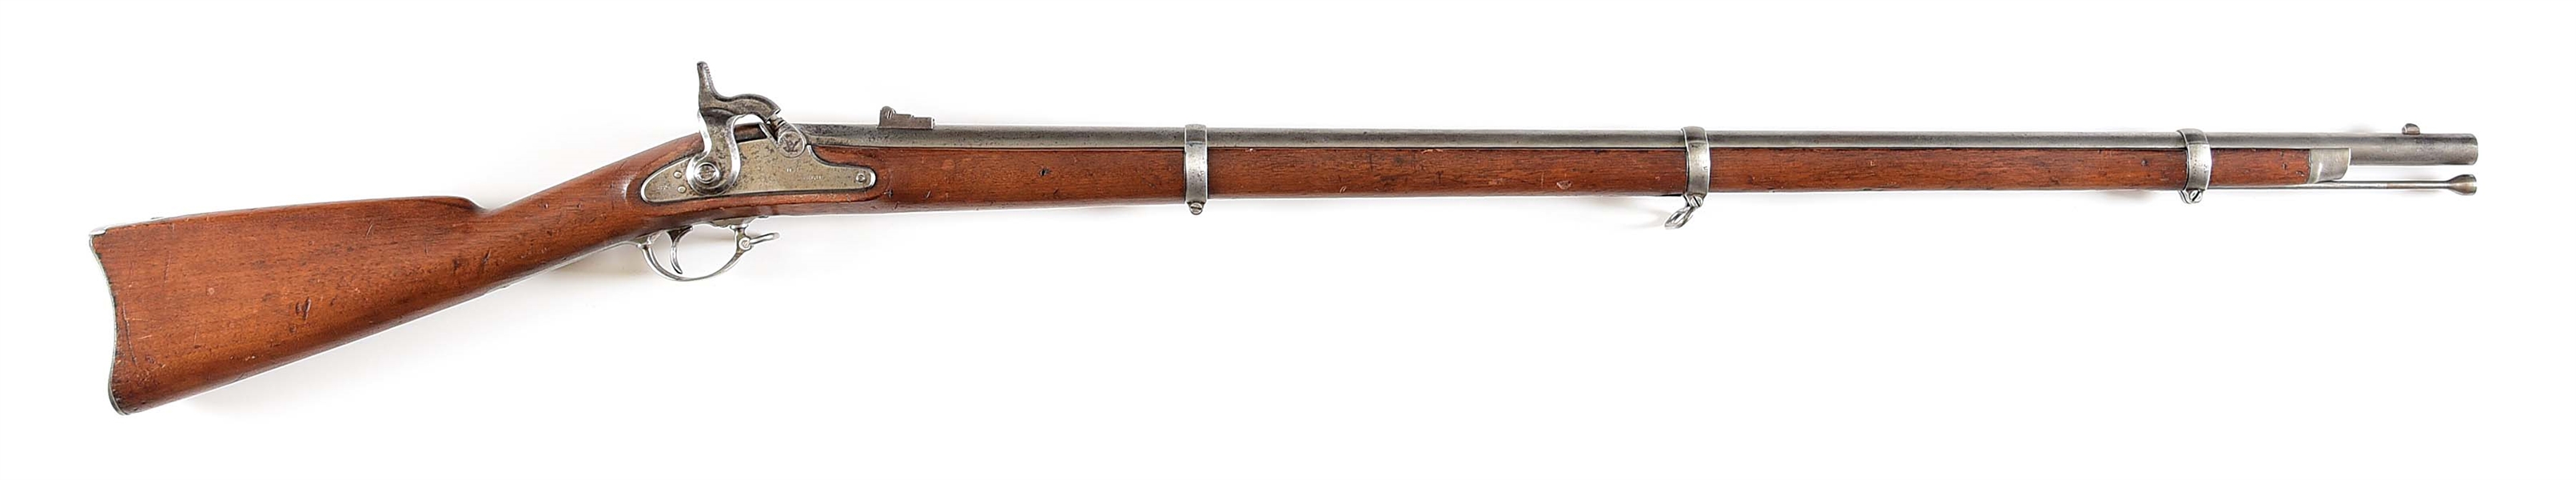 (A) U.S. SPRINGFIELD MODEL 1863 PERCUSSION RIFLED MUSKET. 